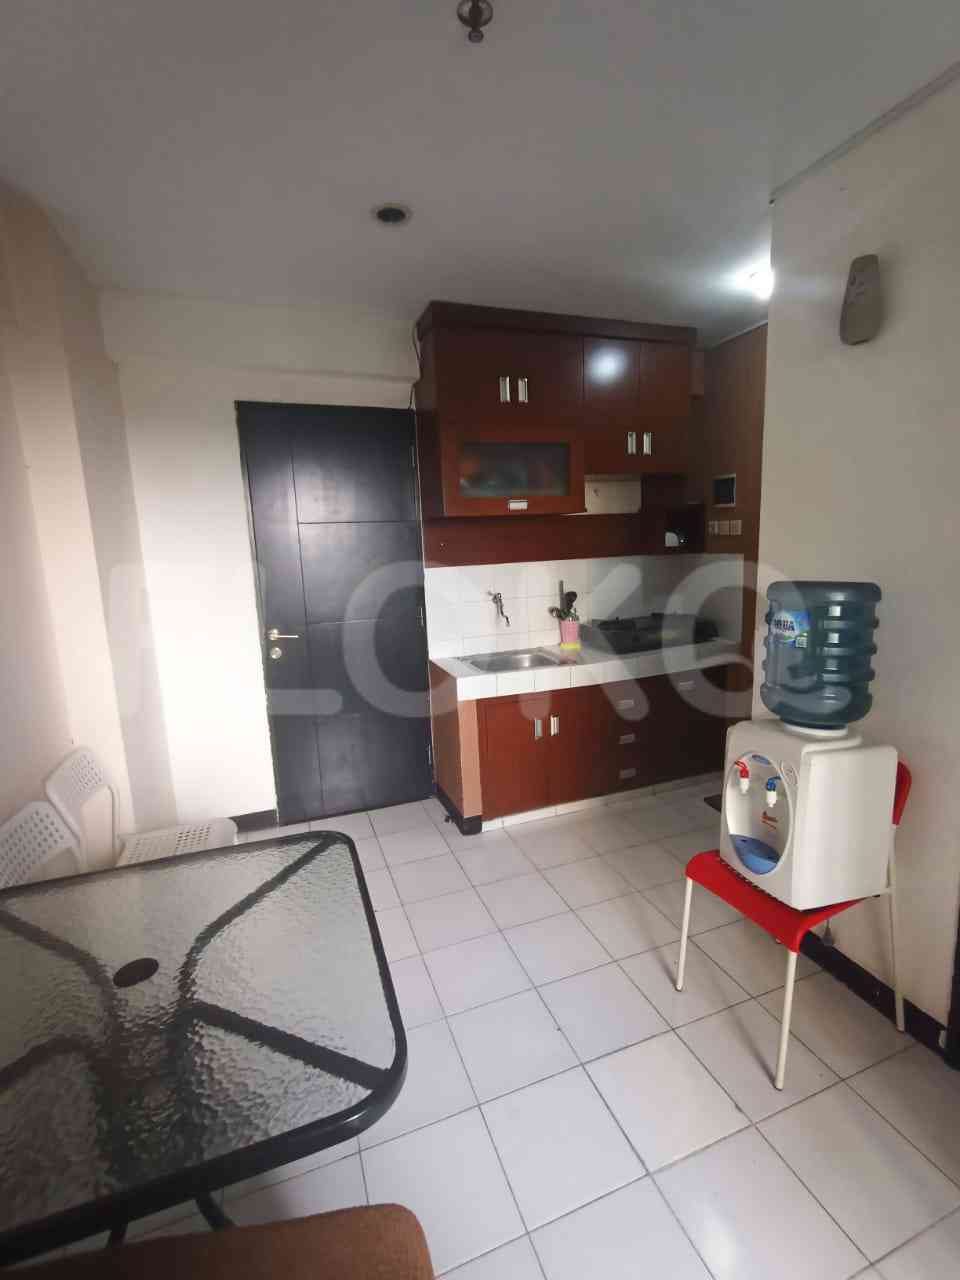 1 Bedroom on 5th Floor for Rent in Sentra Timur Residence - fcac7a 6